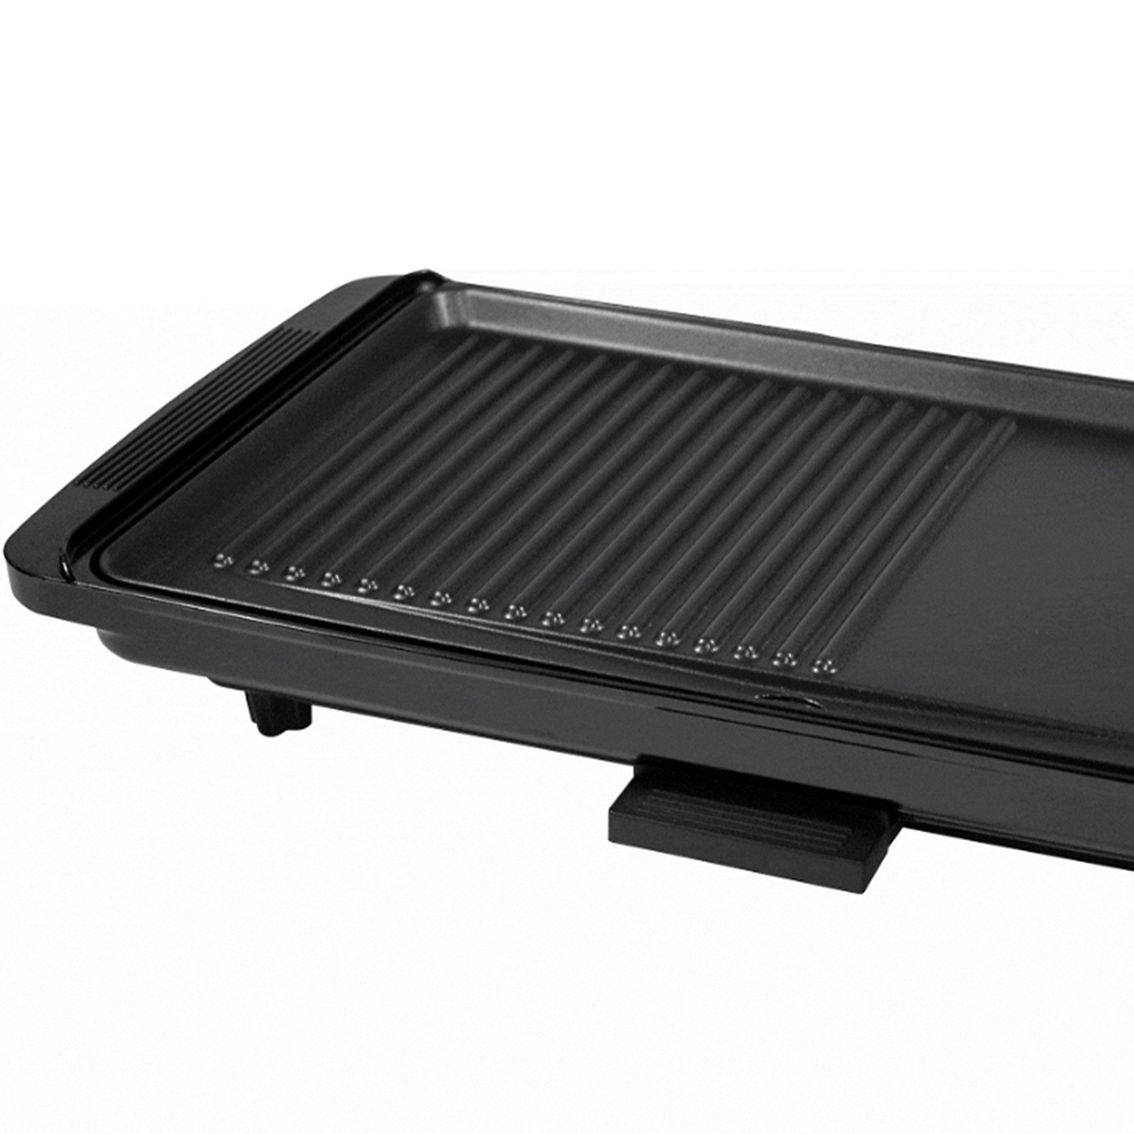 Better Chef 2 in 1 Family Size Electric Counter Top Grill/Griddle - Image 3 of 4